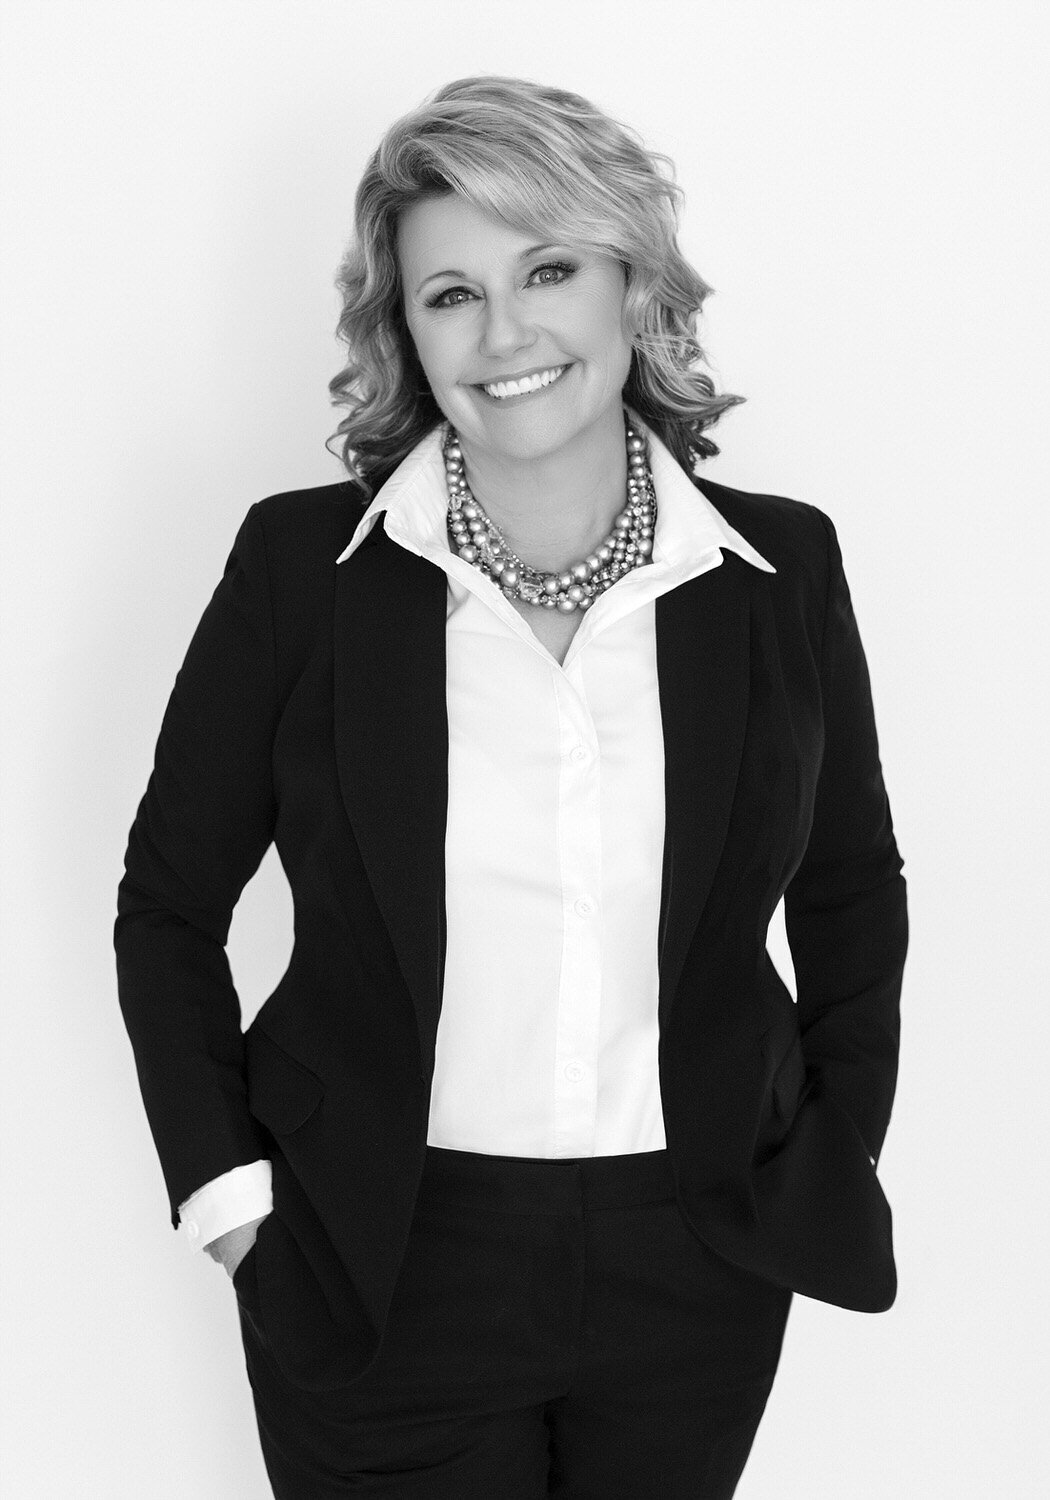 Black and white headshot of a woman realtor.